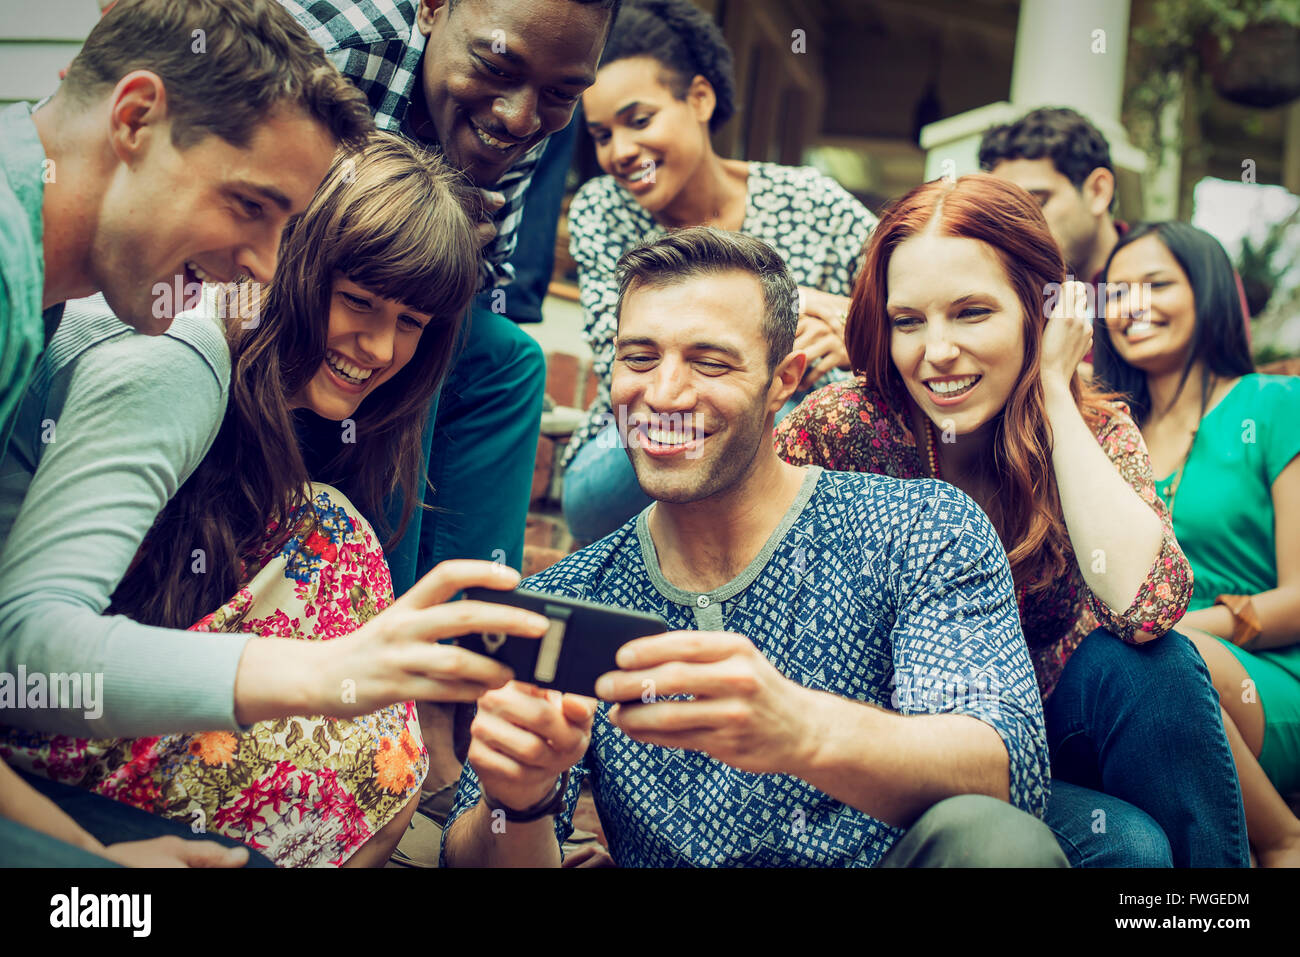 A group of friends on the steps of a house porch, looking at a smart phone selfy on the screen. Stock Photo